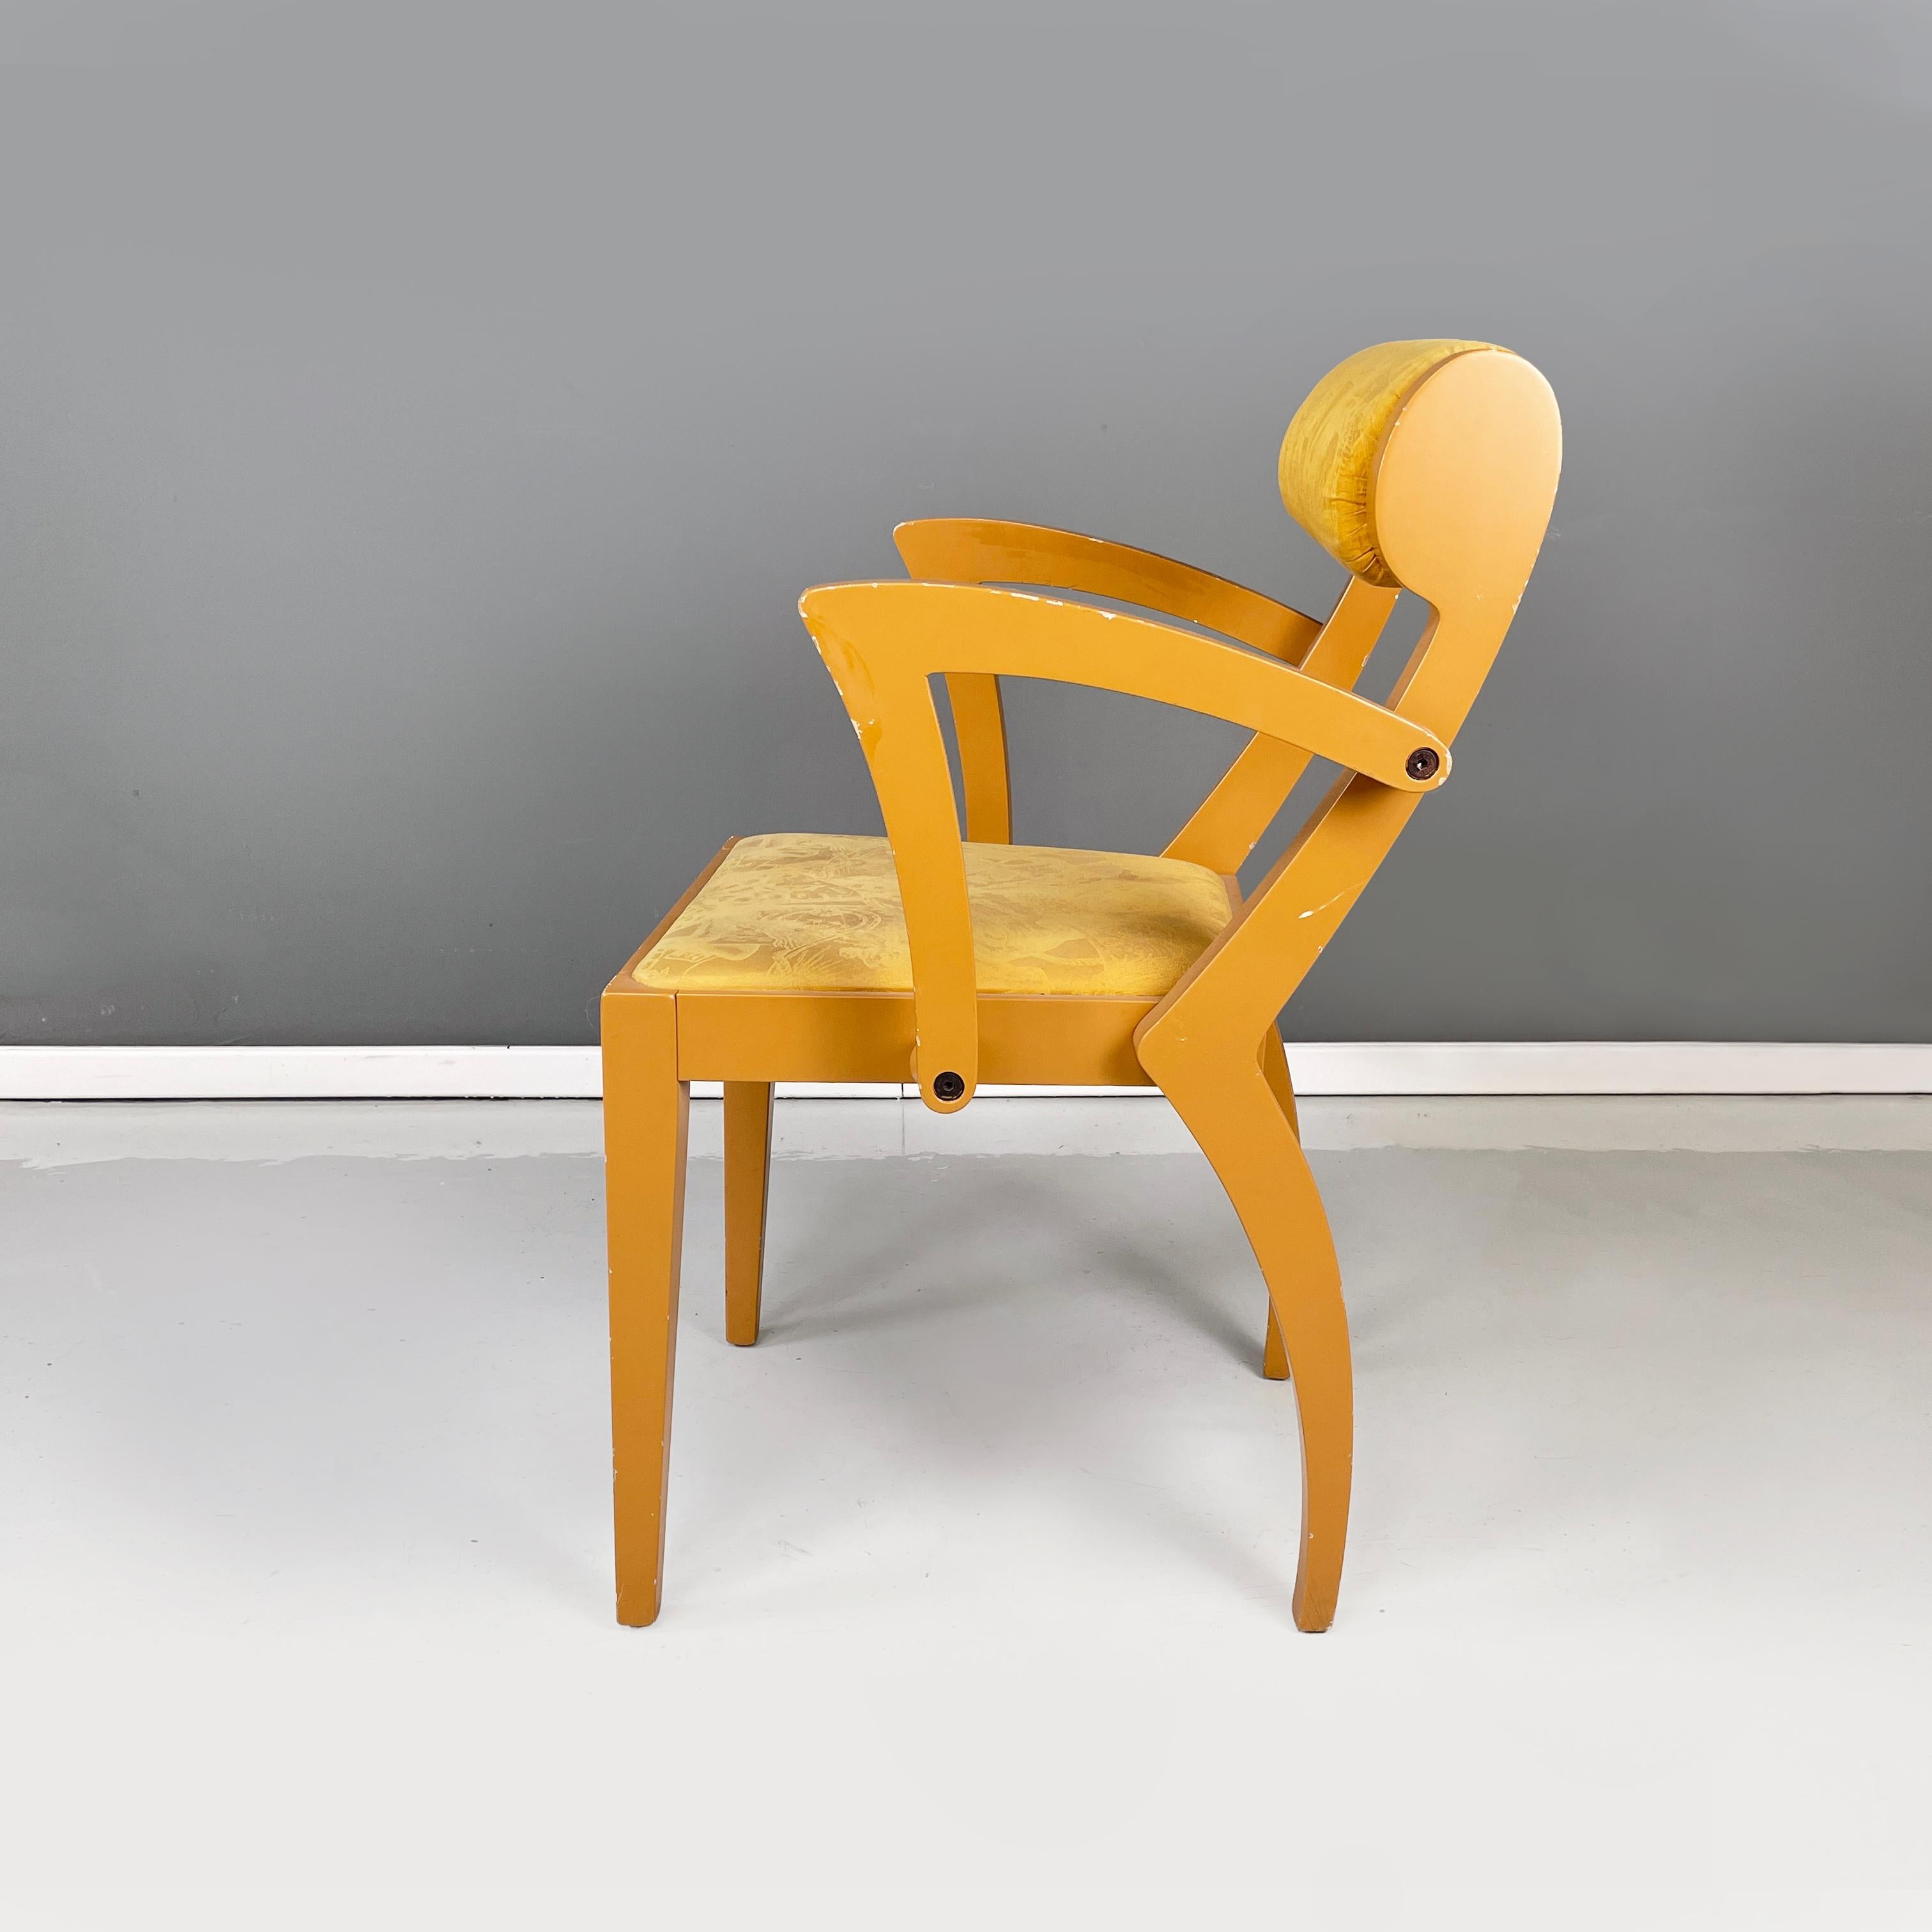 Italian modern yellow fabric and wooden chair by Bros/s, 1980s
Chair with yellow painted wooden structure. The padded backrest covered in worked yellow fabric is cylindrical in shape. The square seat is also padded and covered in yellow fabric.